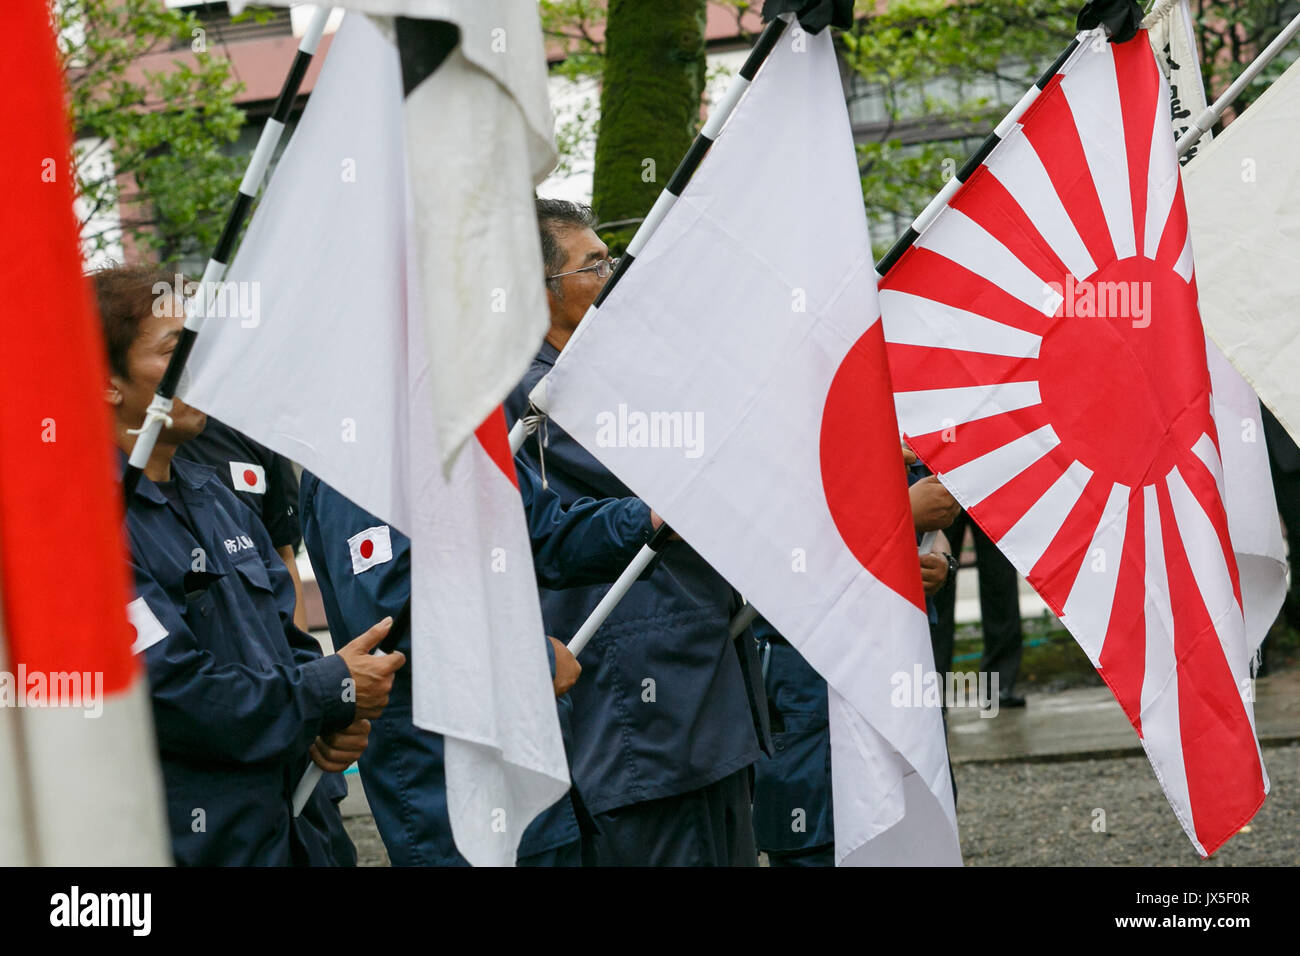 Tokyo, Japan. 15th Aug, 2017. Japanese nationalists dressed in military uniform hold war flags of the Imperial Japanese Army to pay their respects to the war dead at Yasukuni Shrine on the 72nd anniversary of Japan's surrender in World War II on August 15, 2017, Tokyo, Japan. Prime Minister Shinzo Abe was not among the lawmakers to visit the Shrine and instead sent a ritual offering to avoid angering neighboring countries who also associate Yasukuni with war criminals and Japan's imperial past. Credit: Rodrigo Reyes Marin/AFLO/Alamy Live News Stock Photo